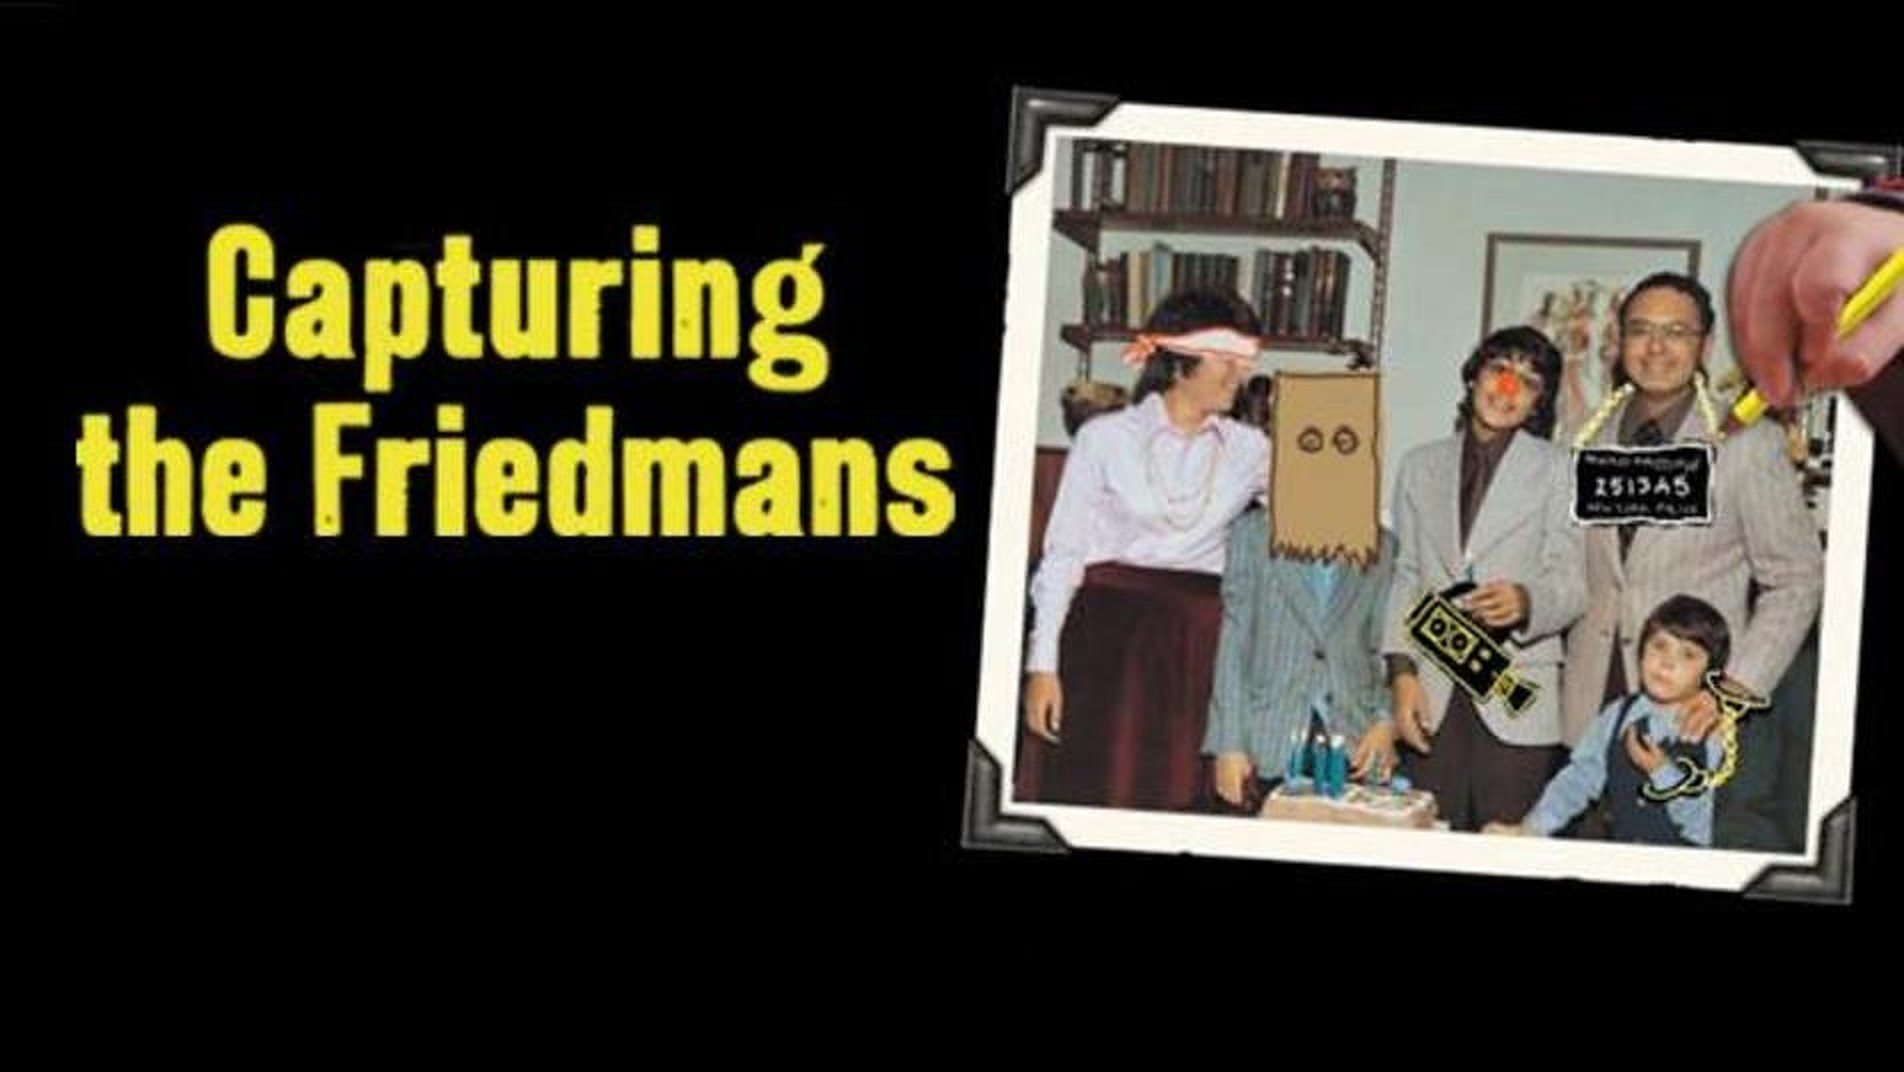 31-facts-about-the-movie-capturing-the-friedmans